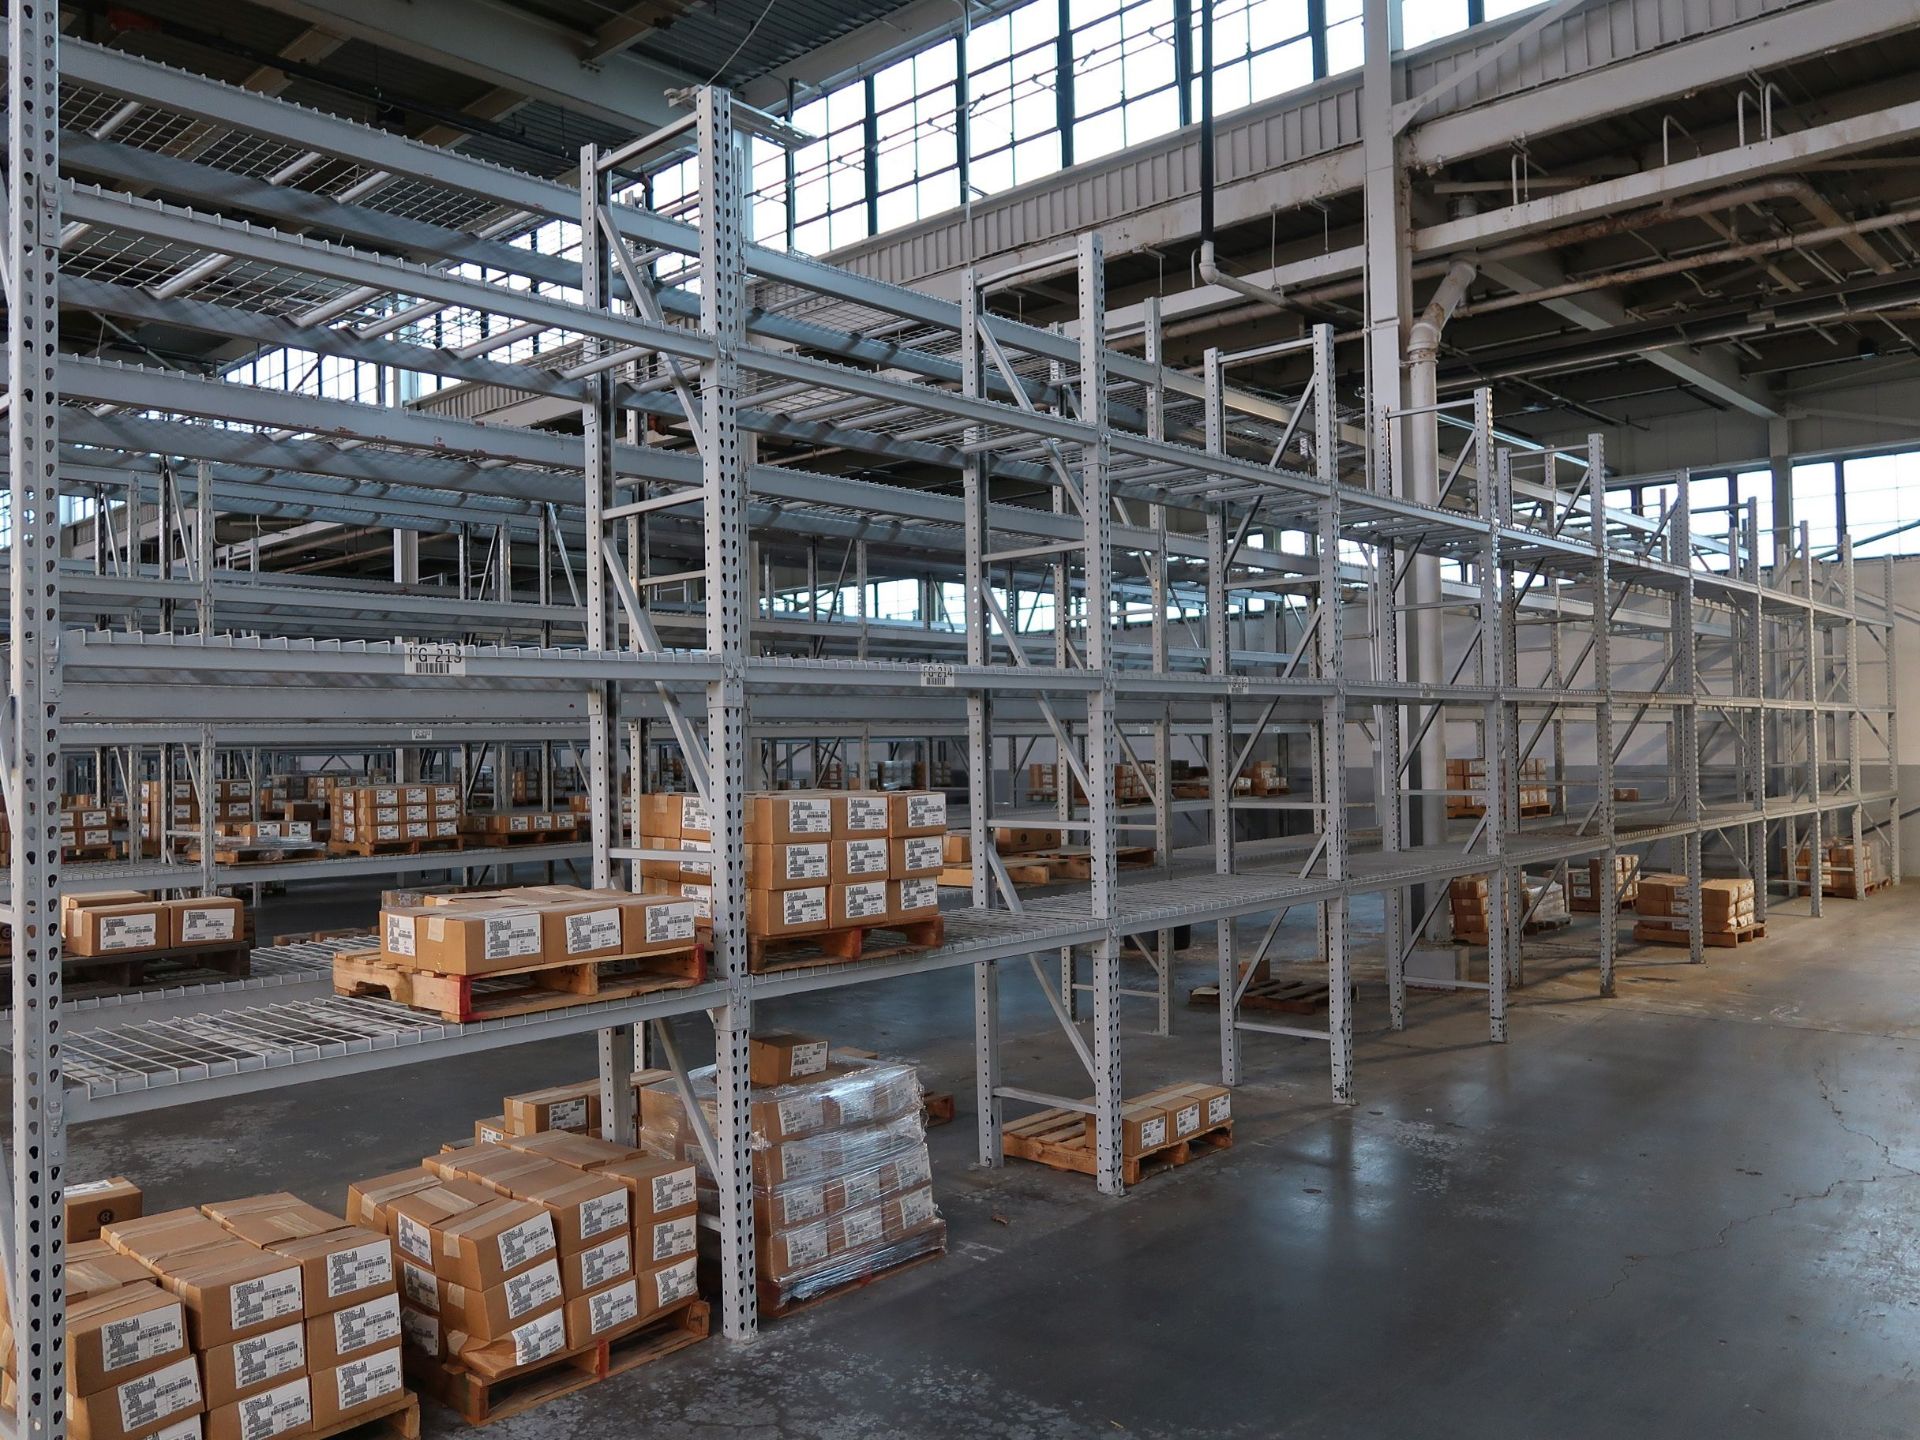 SECTIONS 28" X 70" X 148" TEAR DROP TYPE ADJUSTABLE BEAM PALLET RACKS WITH (11) 28" X 148" UPRIGHTS,